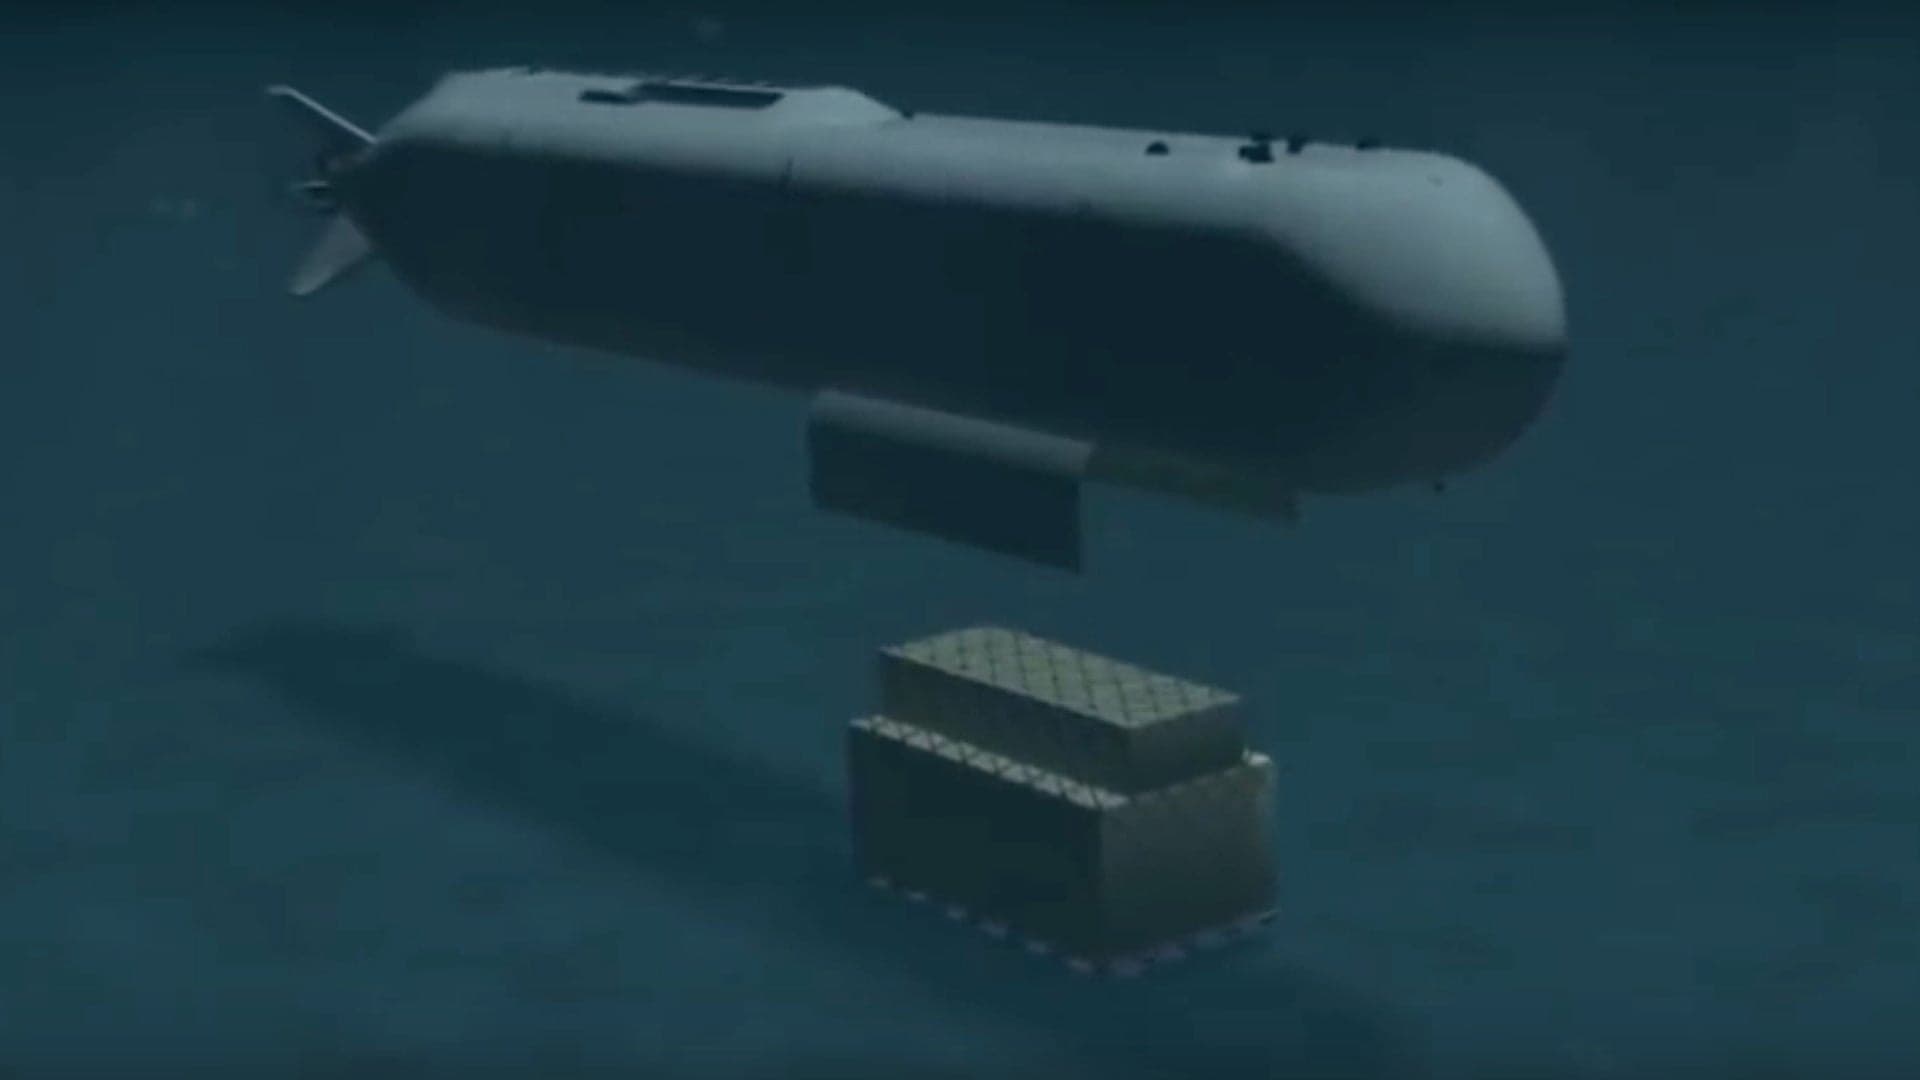 Oh Look, Boeing Made a Scary Giant Robot Submarine